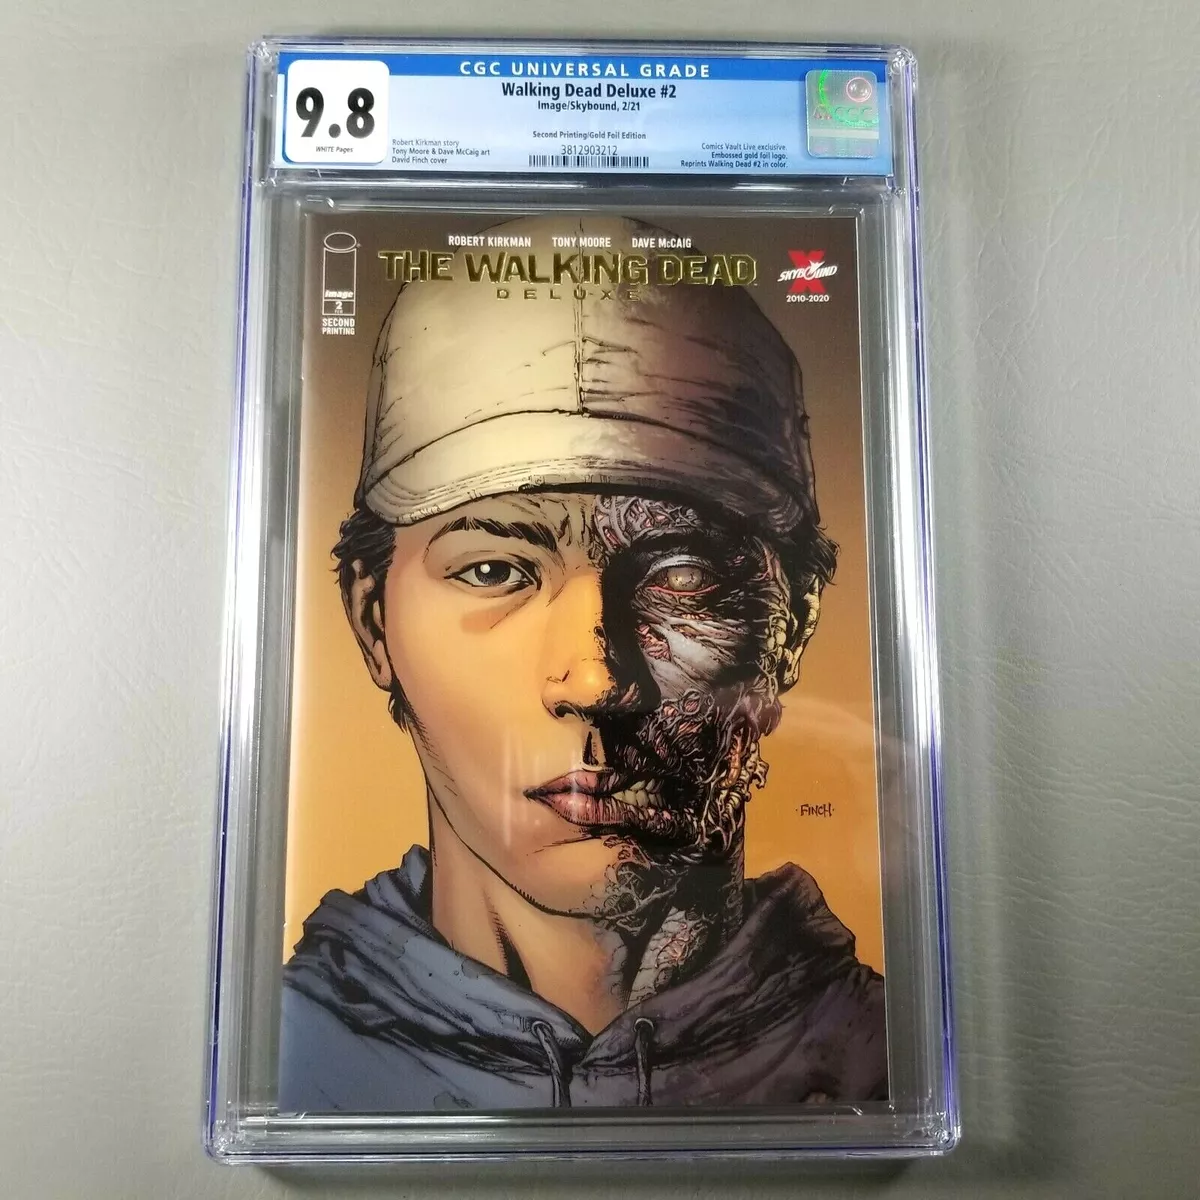 THE WALKING DEAD DELUXE #2 SECOND PRINT COLOR WITH GOLD FOIL LOGO 